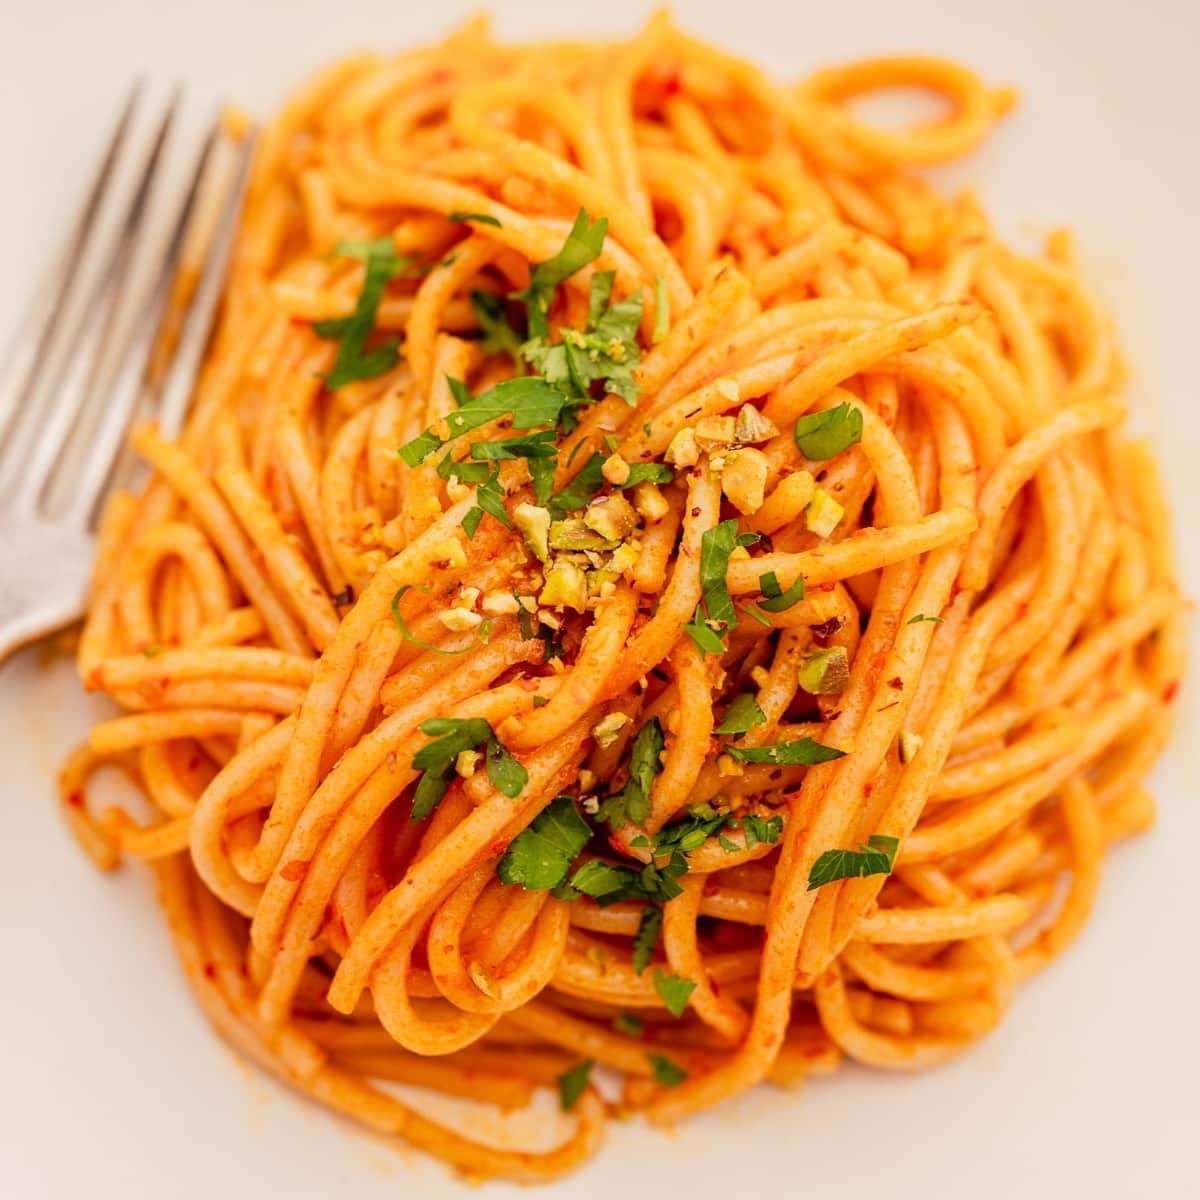 A plate of spaghetti garnished with chopped herbs and nuts, accompanied by a fork on the side.